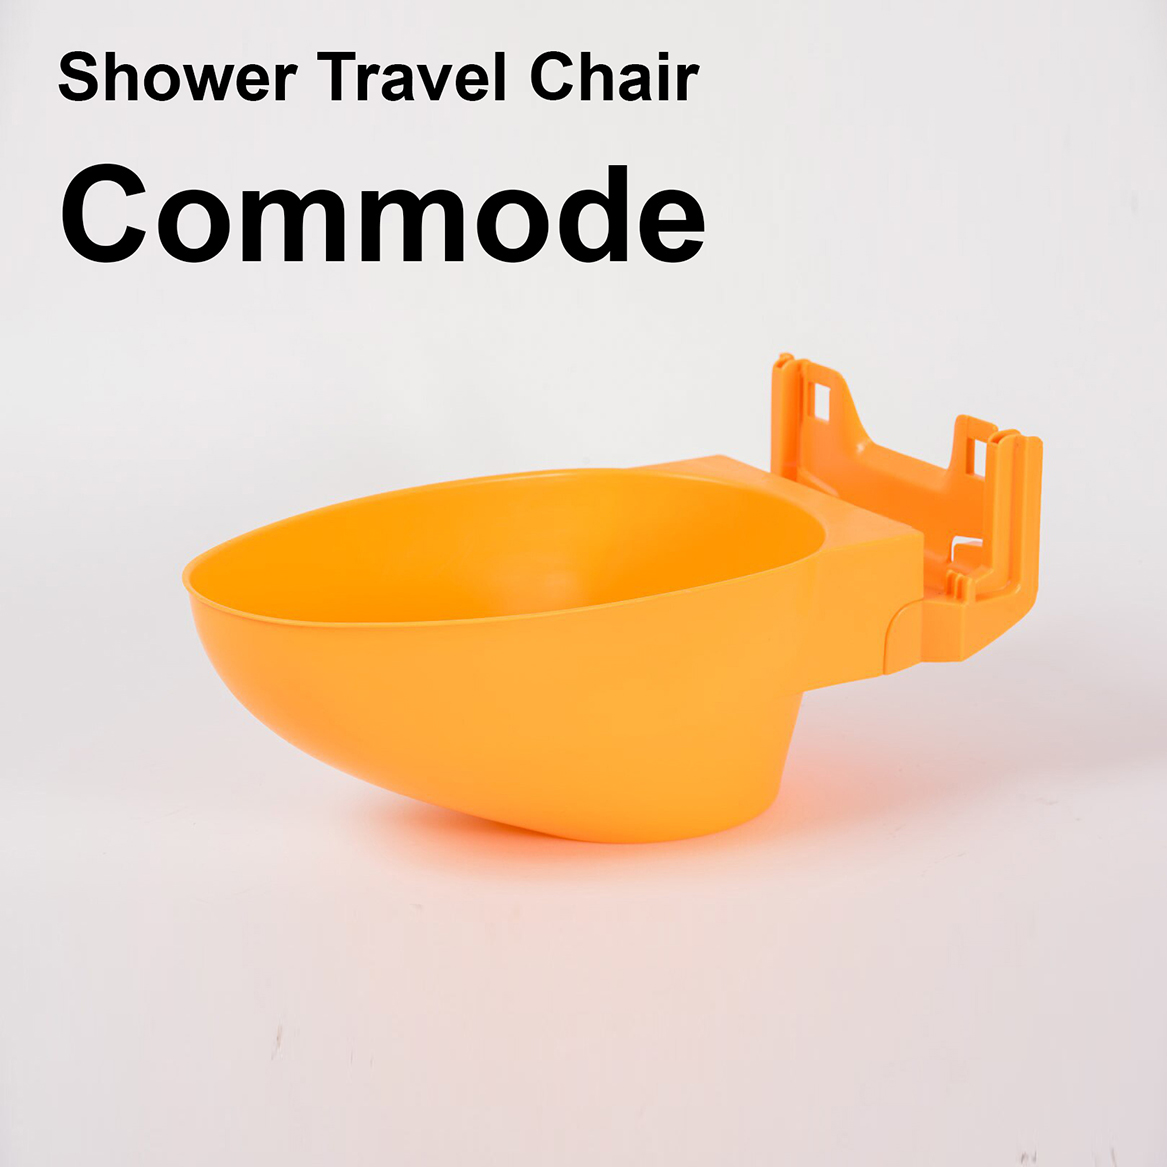 Shower Travel Chair | Michigan USA The Shower Travel Chair